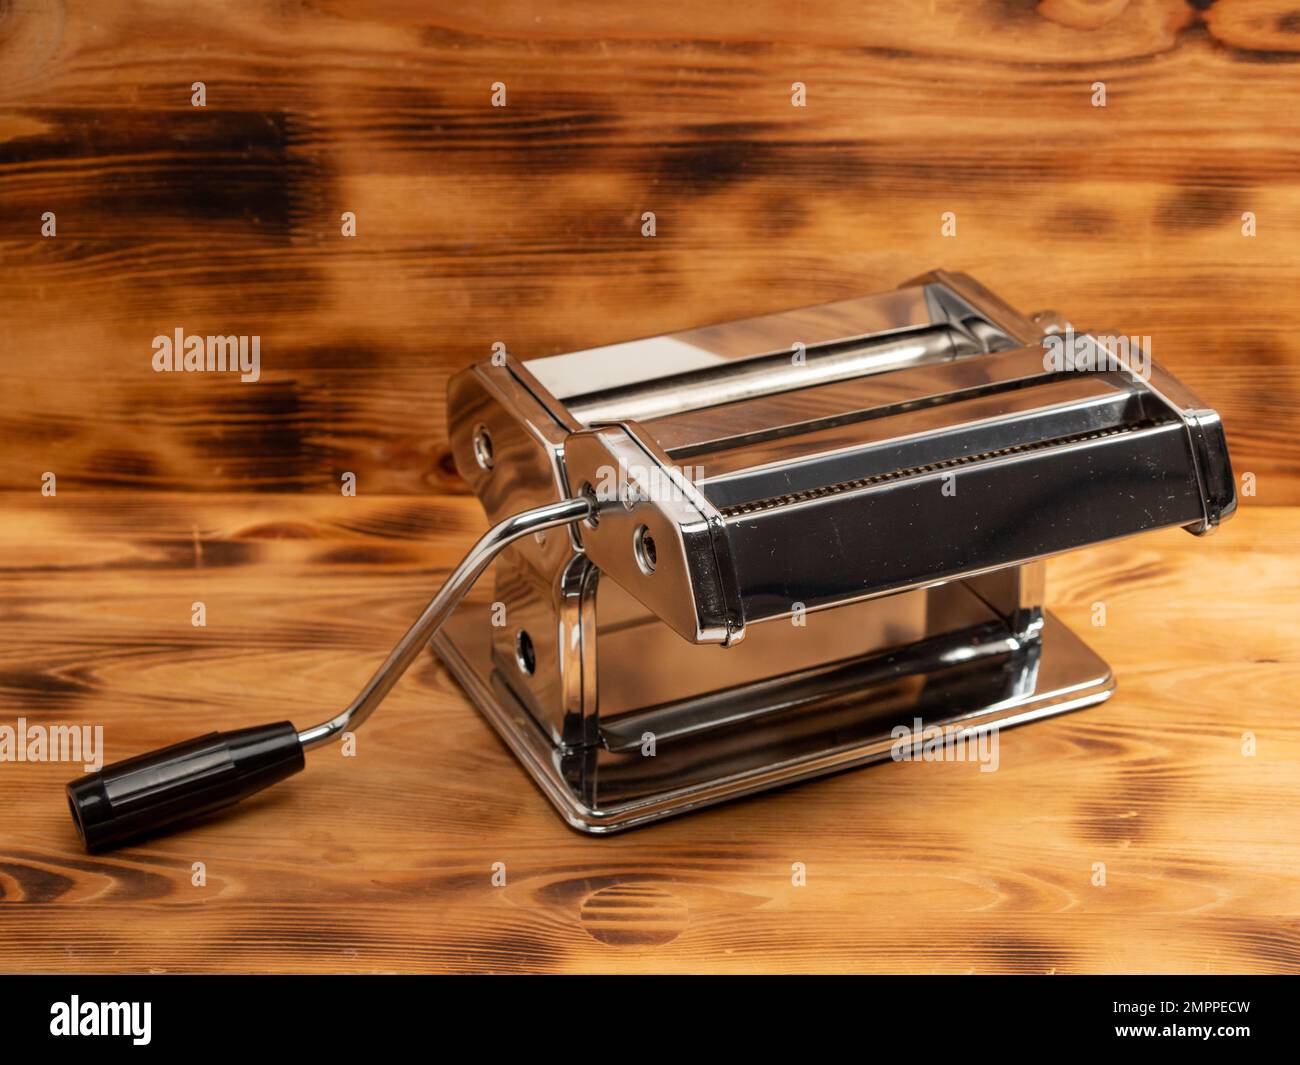 https://c8.alamy.com/comp/2MPPECW/manual-machine-for-rolling-dough-and-pasta-noodle-cutter-chrome-plated-steel-anodized-aluminium-wooden-background-2MPPECW.jpg